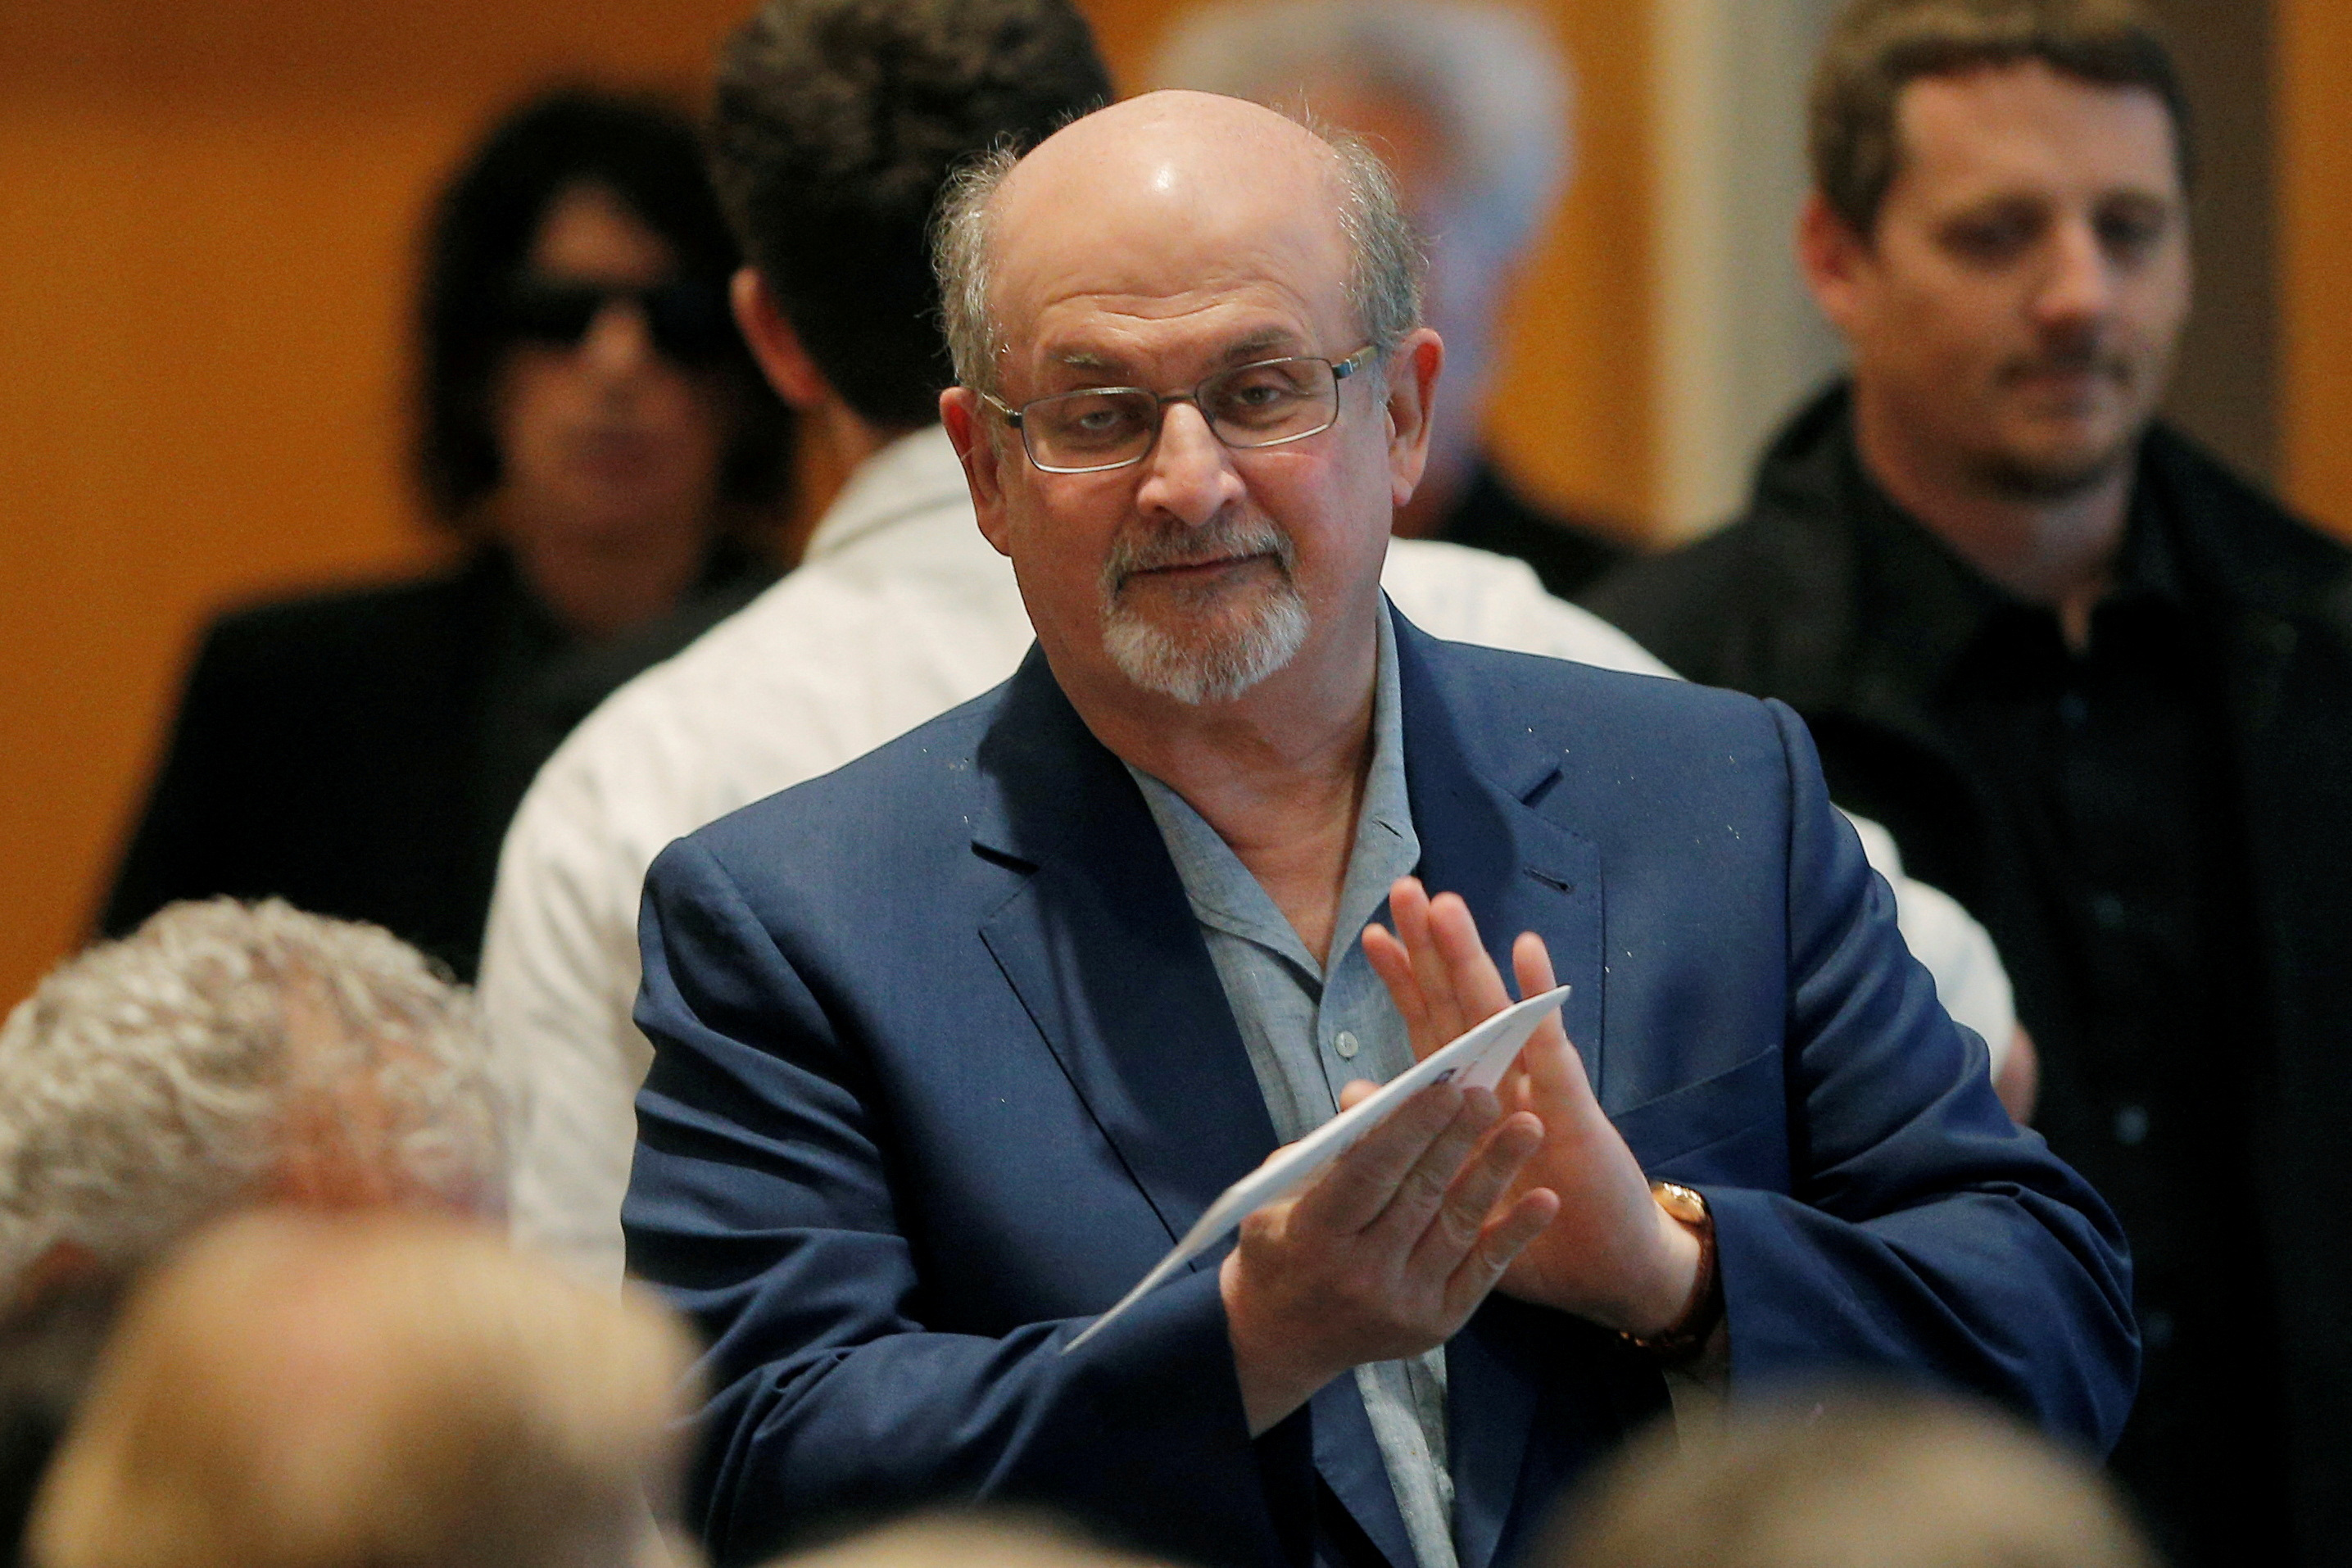 Author Salman Rushdie attended the PEN New England's Song Lyrics of Literary Excellence Award ceremony at the John F. Kennedy Library in Boston.